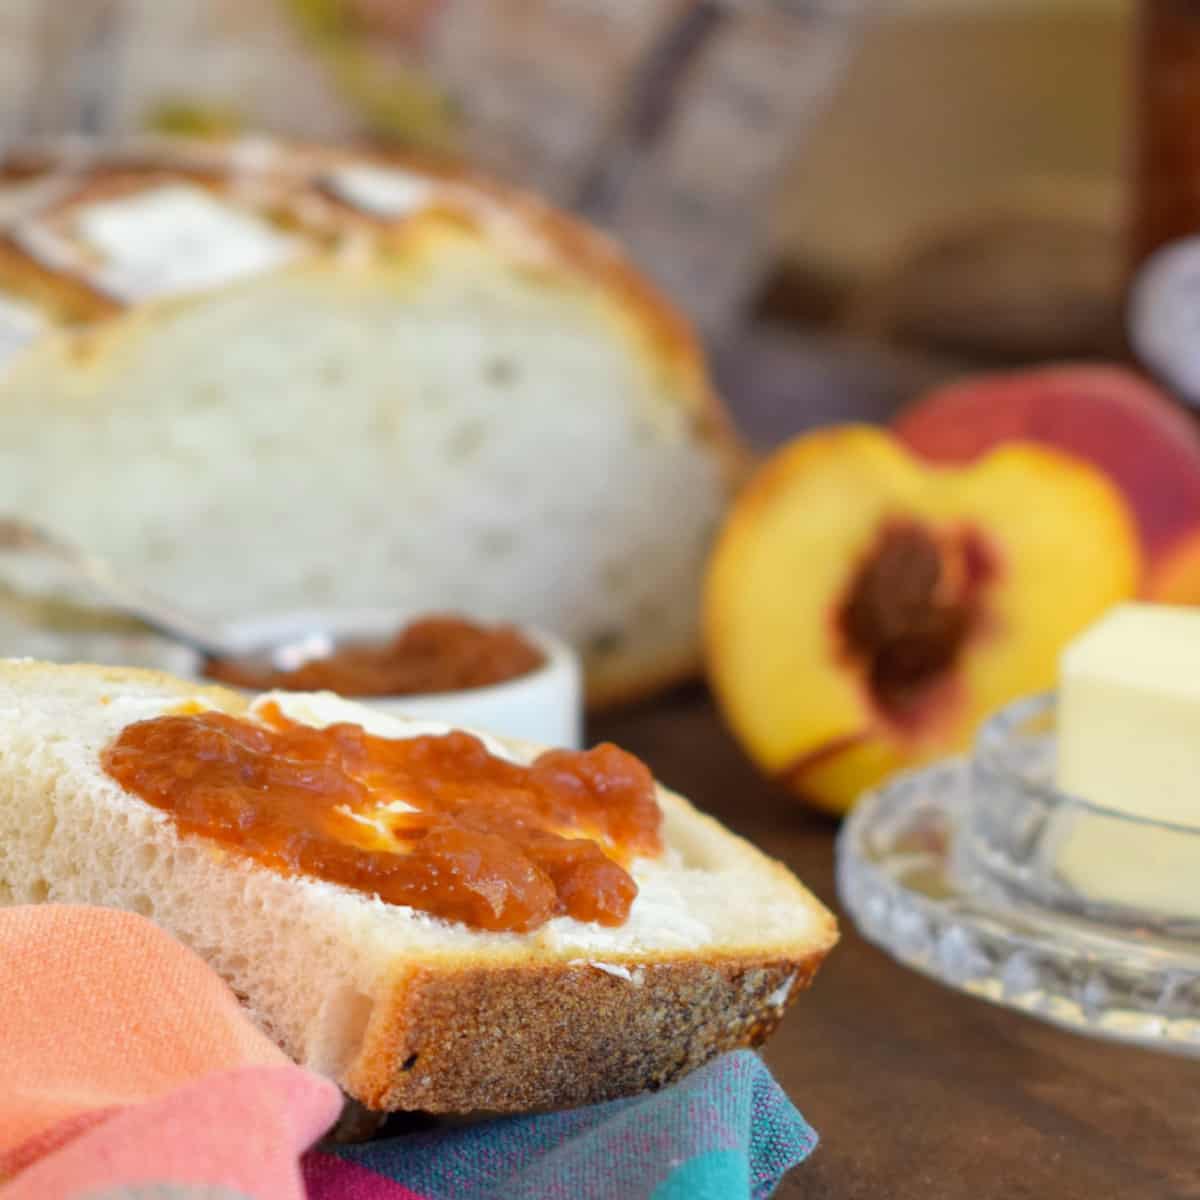 Fresh bread, unsalted butter, and fresh peaches highlight this photo of Fresh Country Peach Butter.